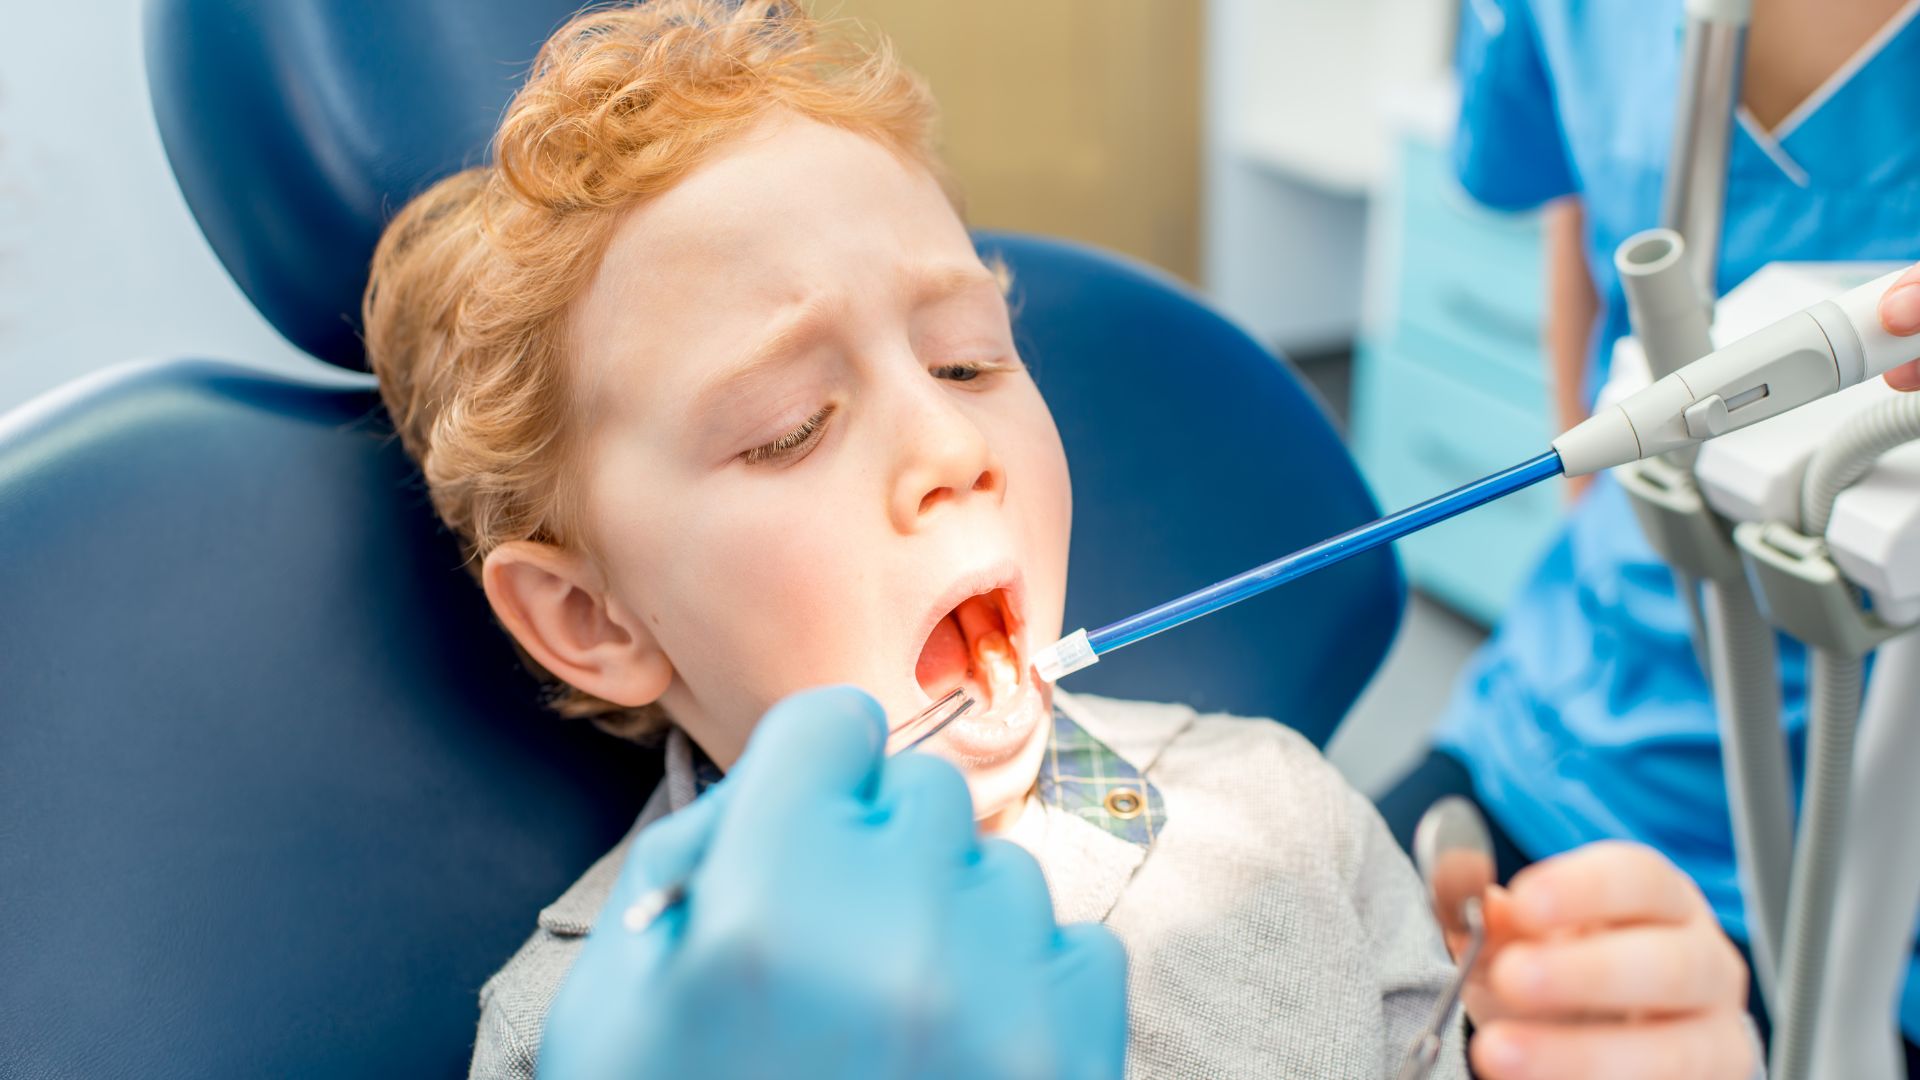 Dental Fear In Children: Brought On By Parents?